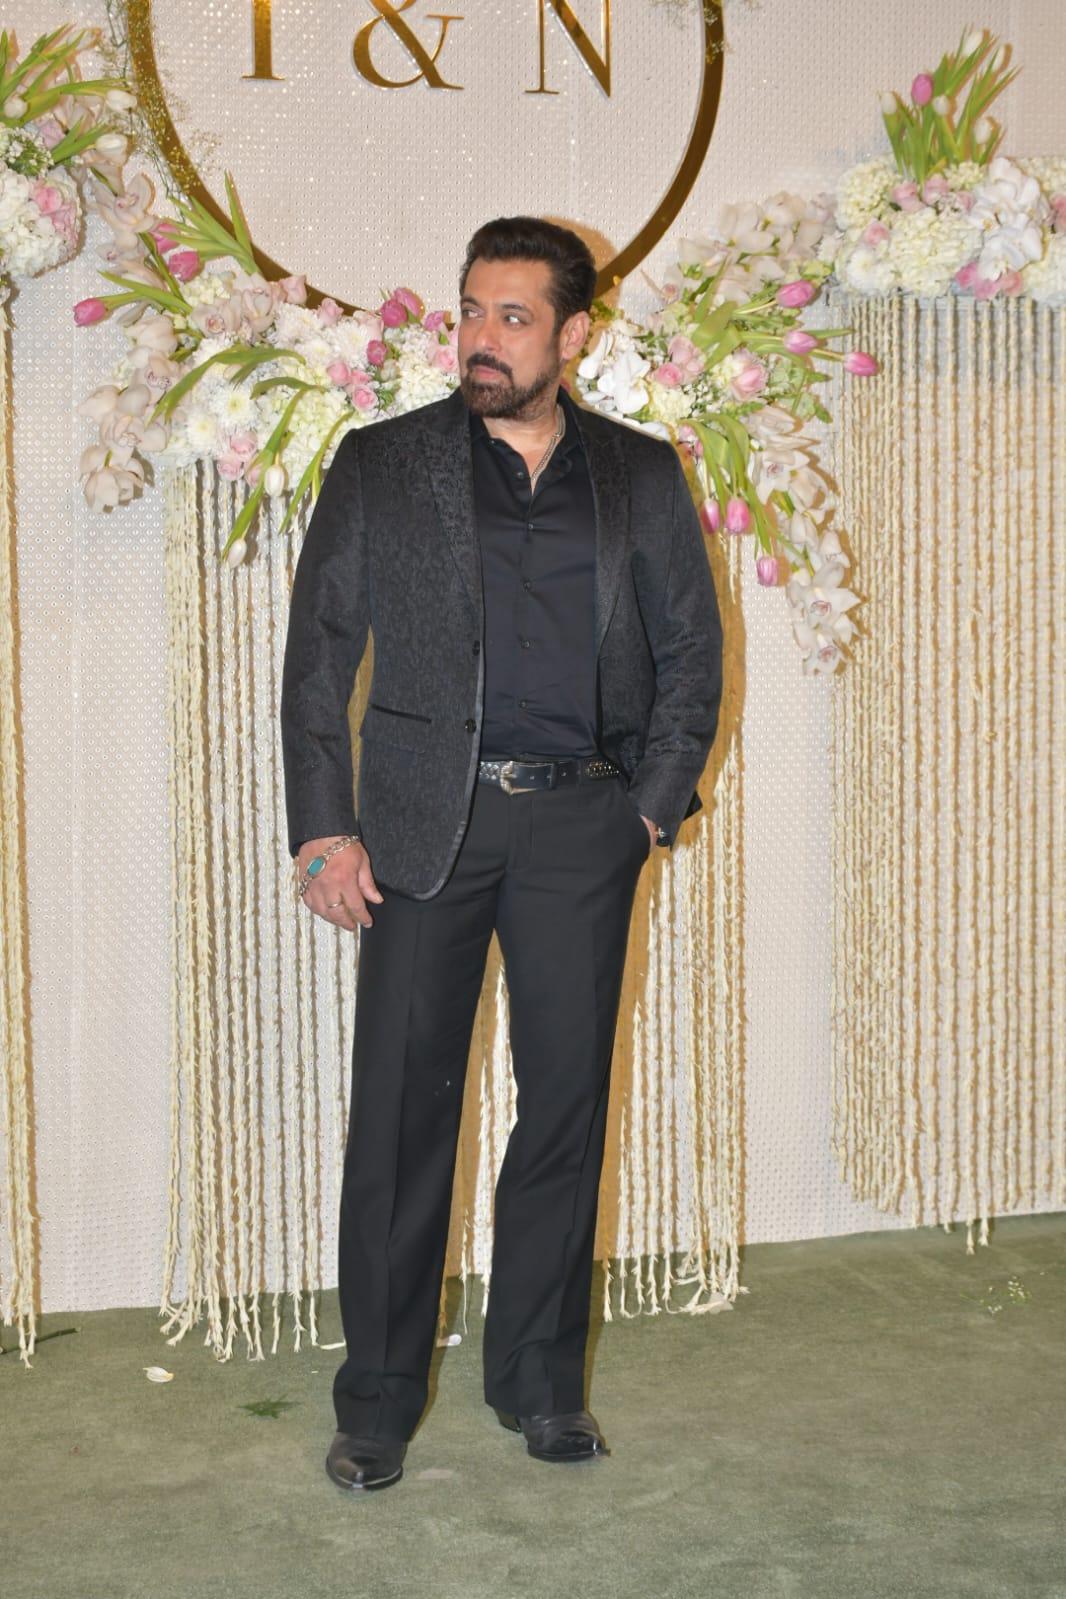 Bhaijaan Salman Khan arrived in a black three-piece suit to bless the couple and stole the spotlight with his swag